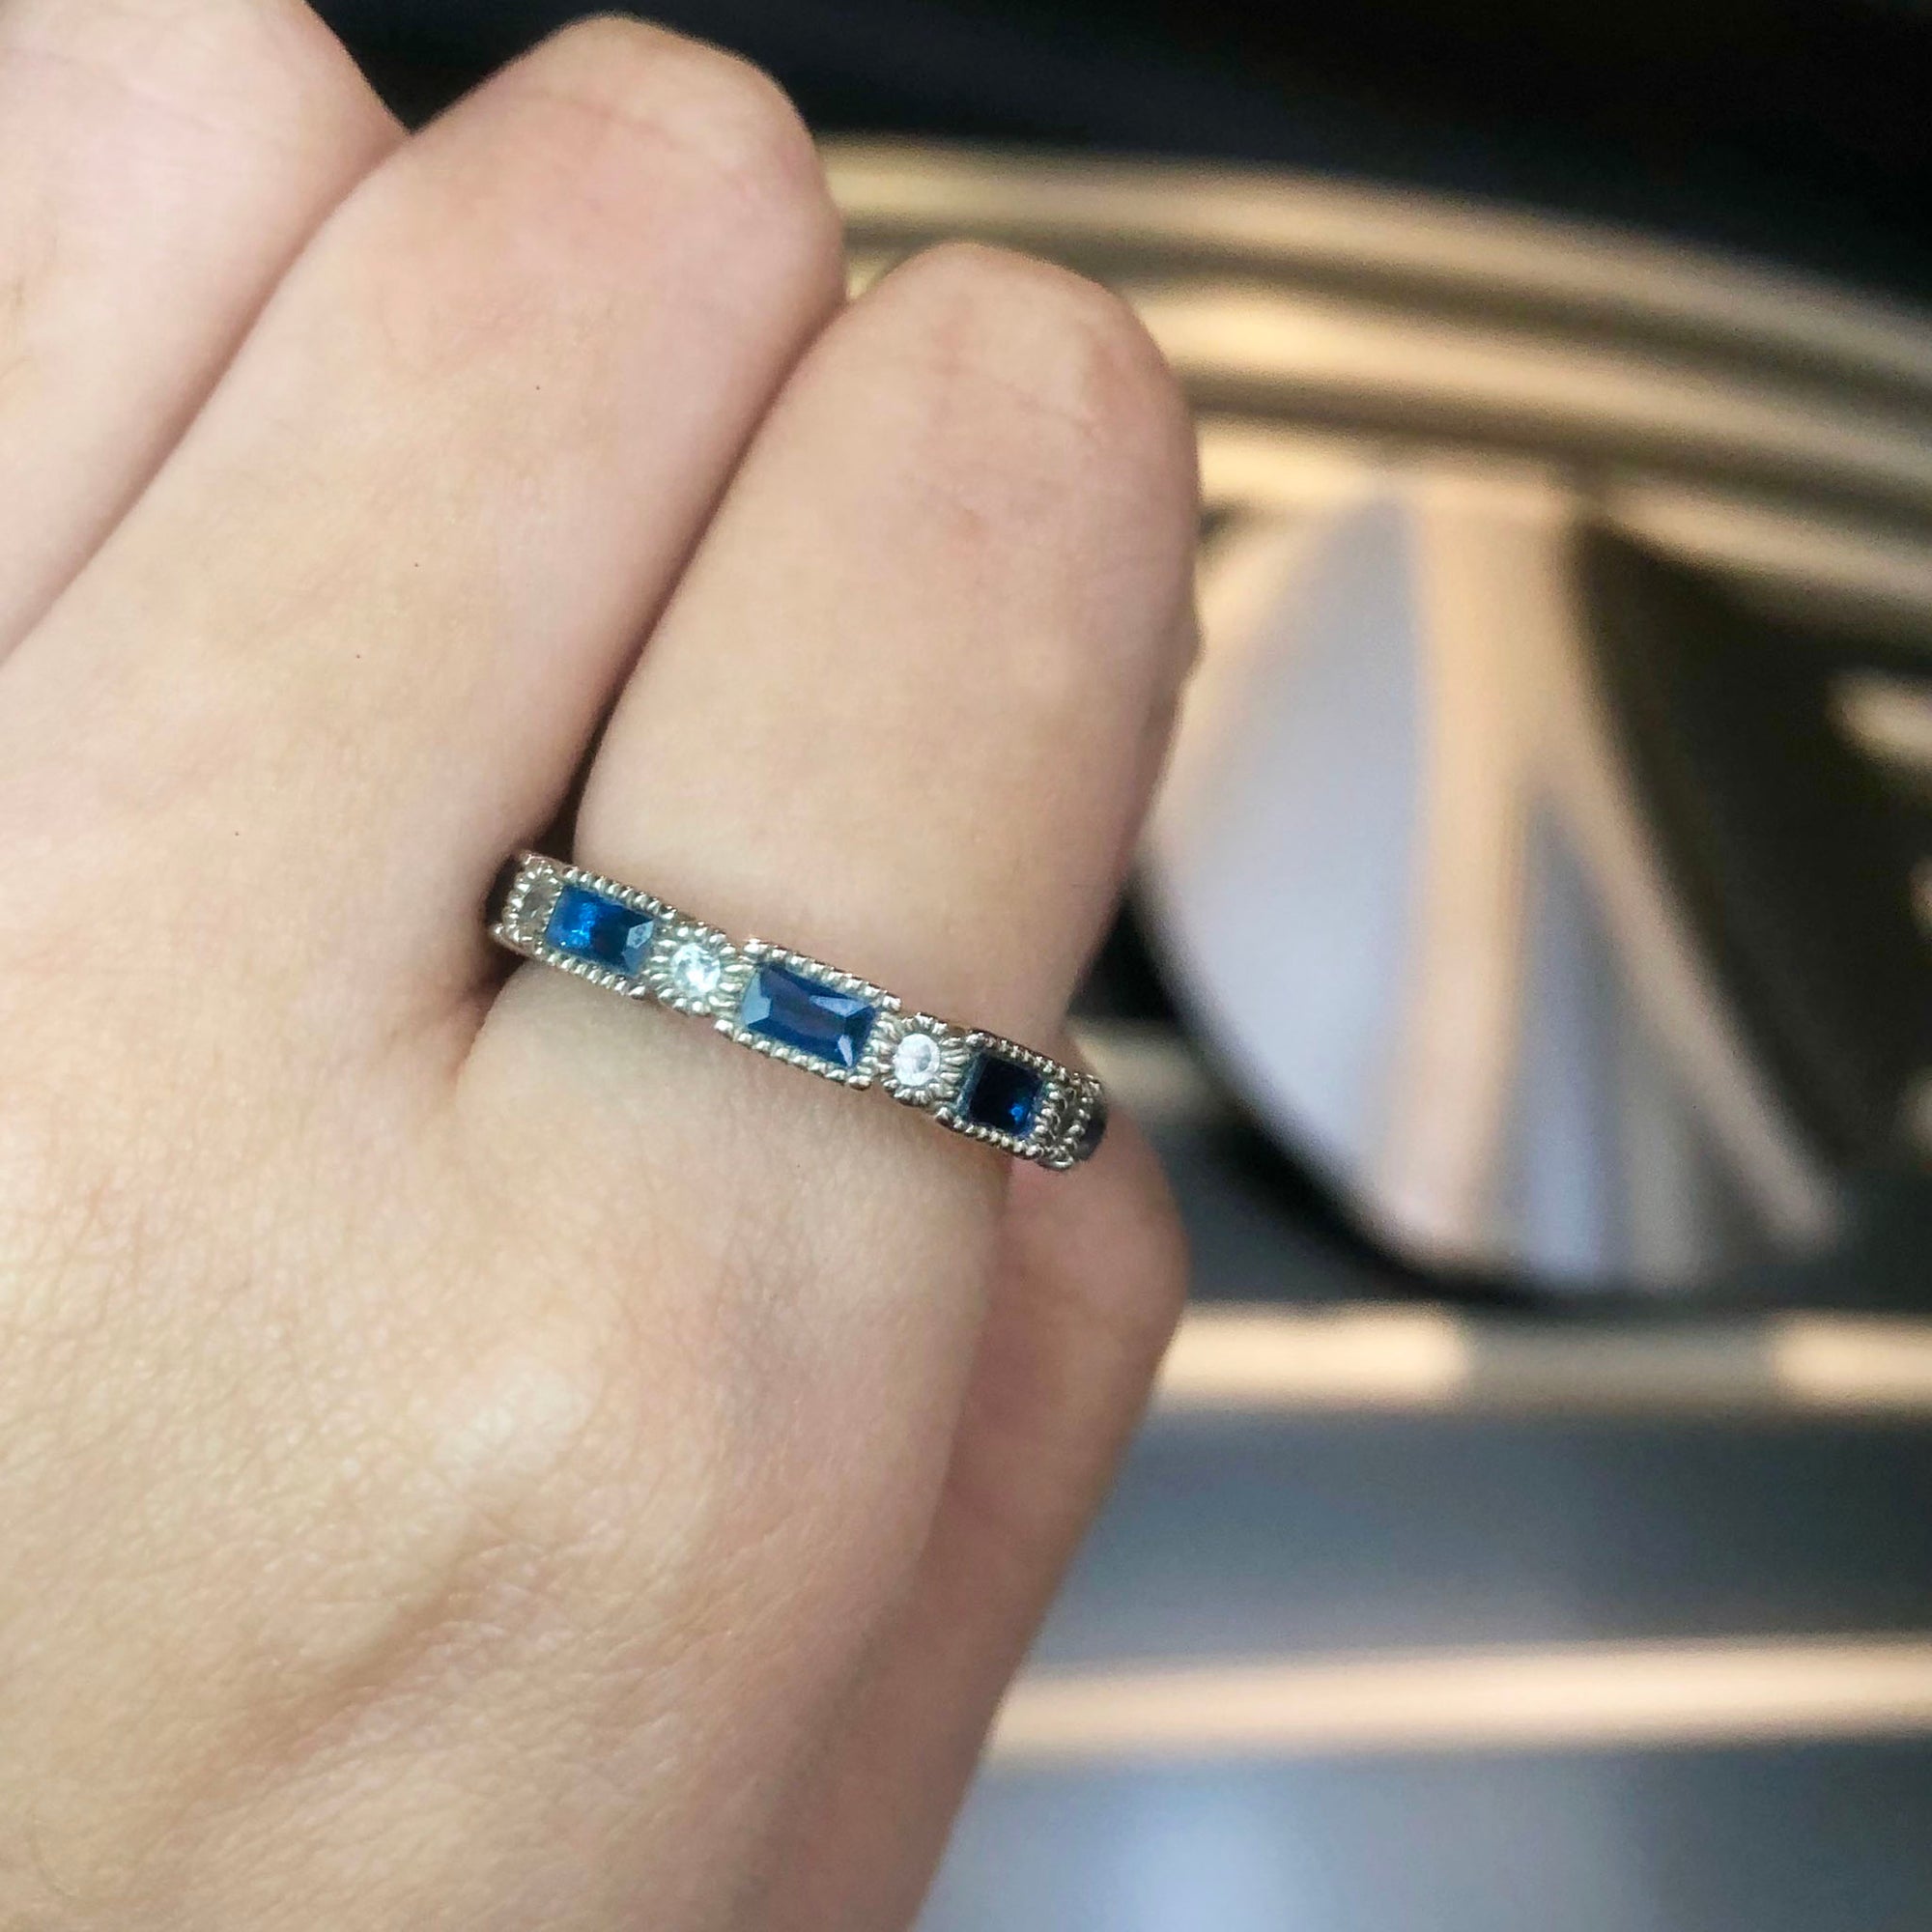 Ether Mix Baguette and Round Eternity Ring AG809